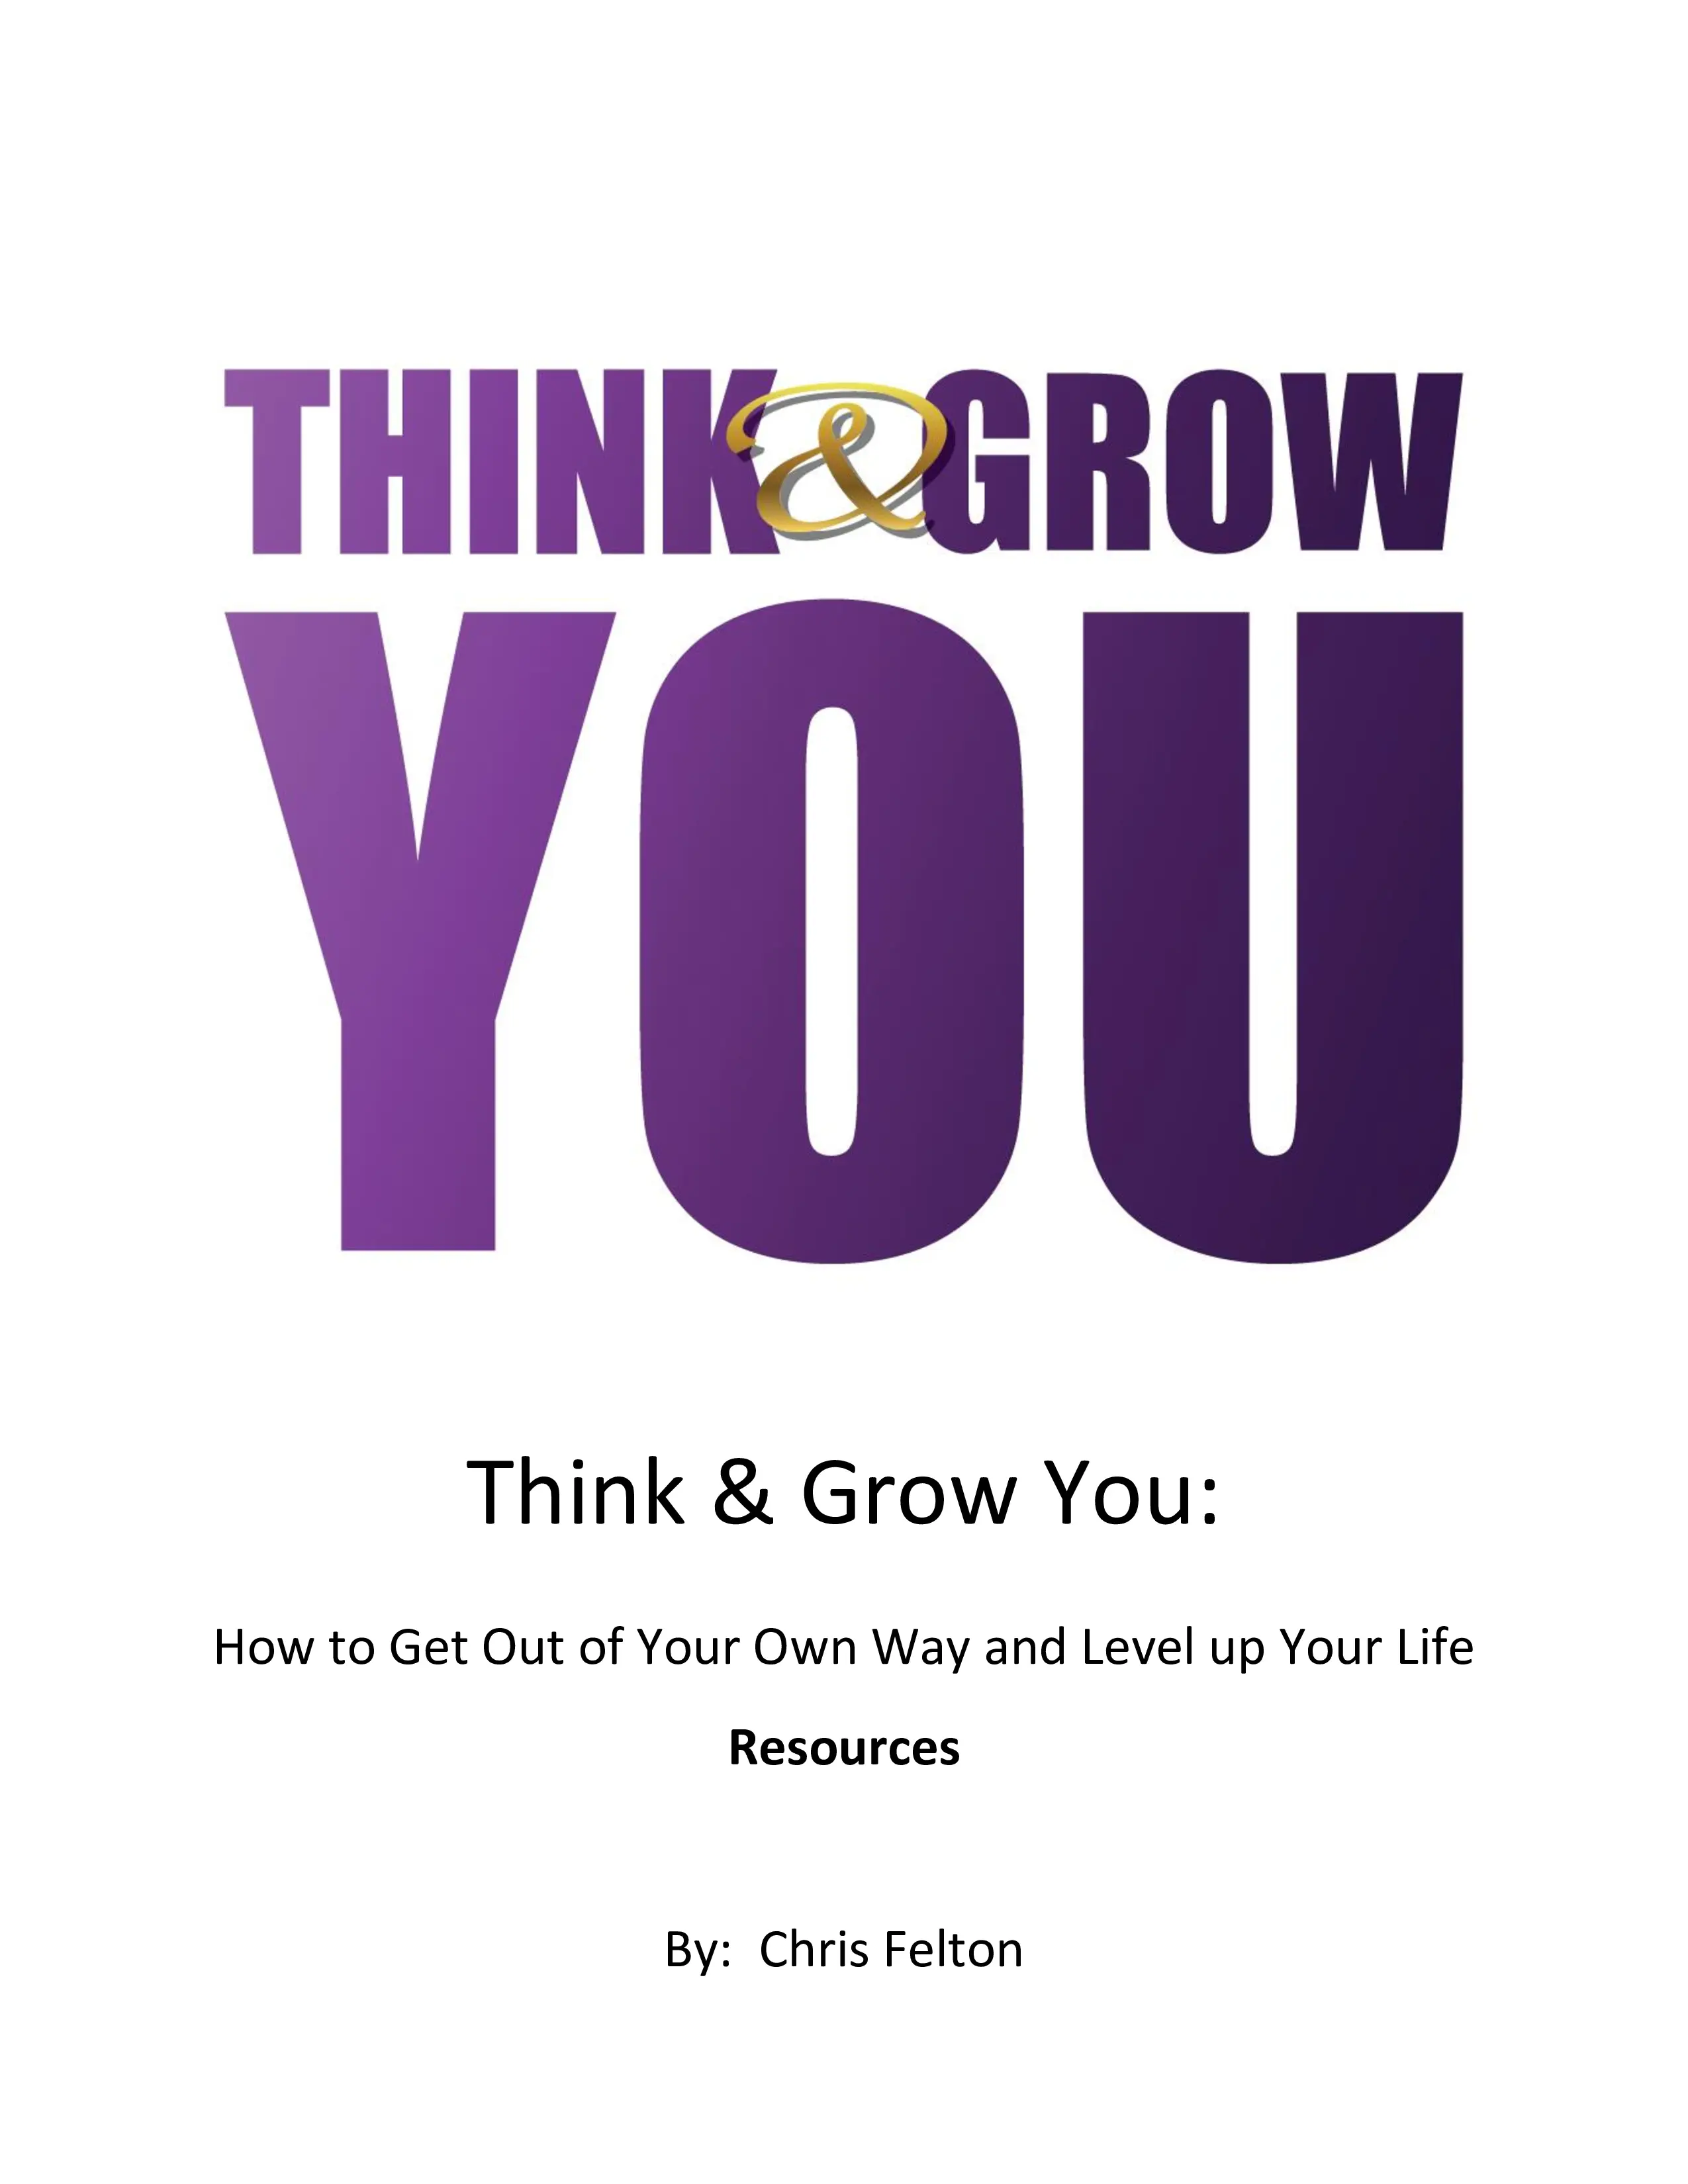 Think & Grow You book cover